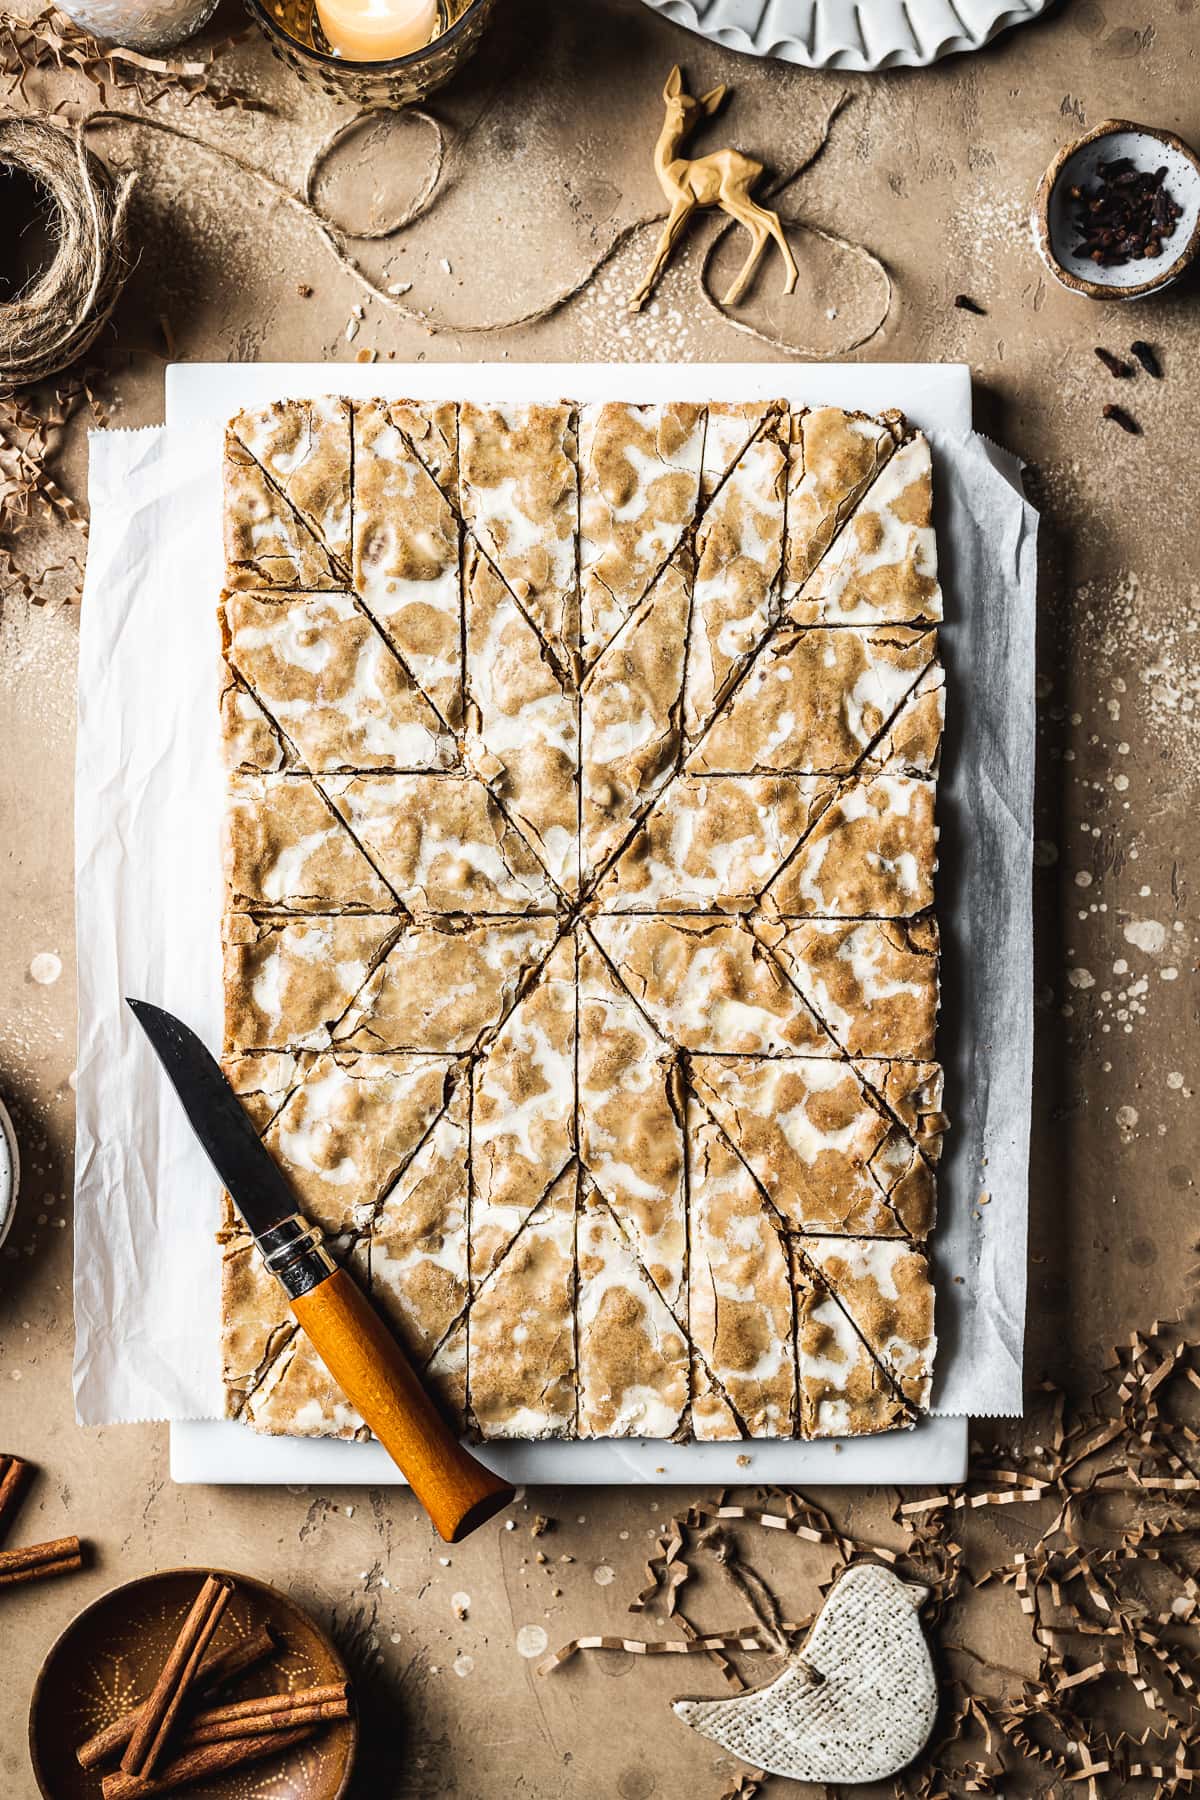 Bar cookies on a marble block and white parchment paper, cut into a decorative holiday star pattern. The marble block rests on a tan stone surface and is surrounded by cinnamon sticks, cloves, a votive candle, brown twine, holiday figurines and more cookies.